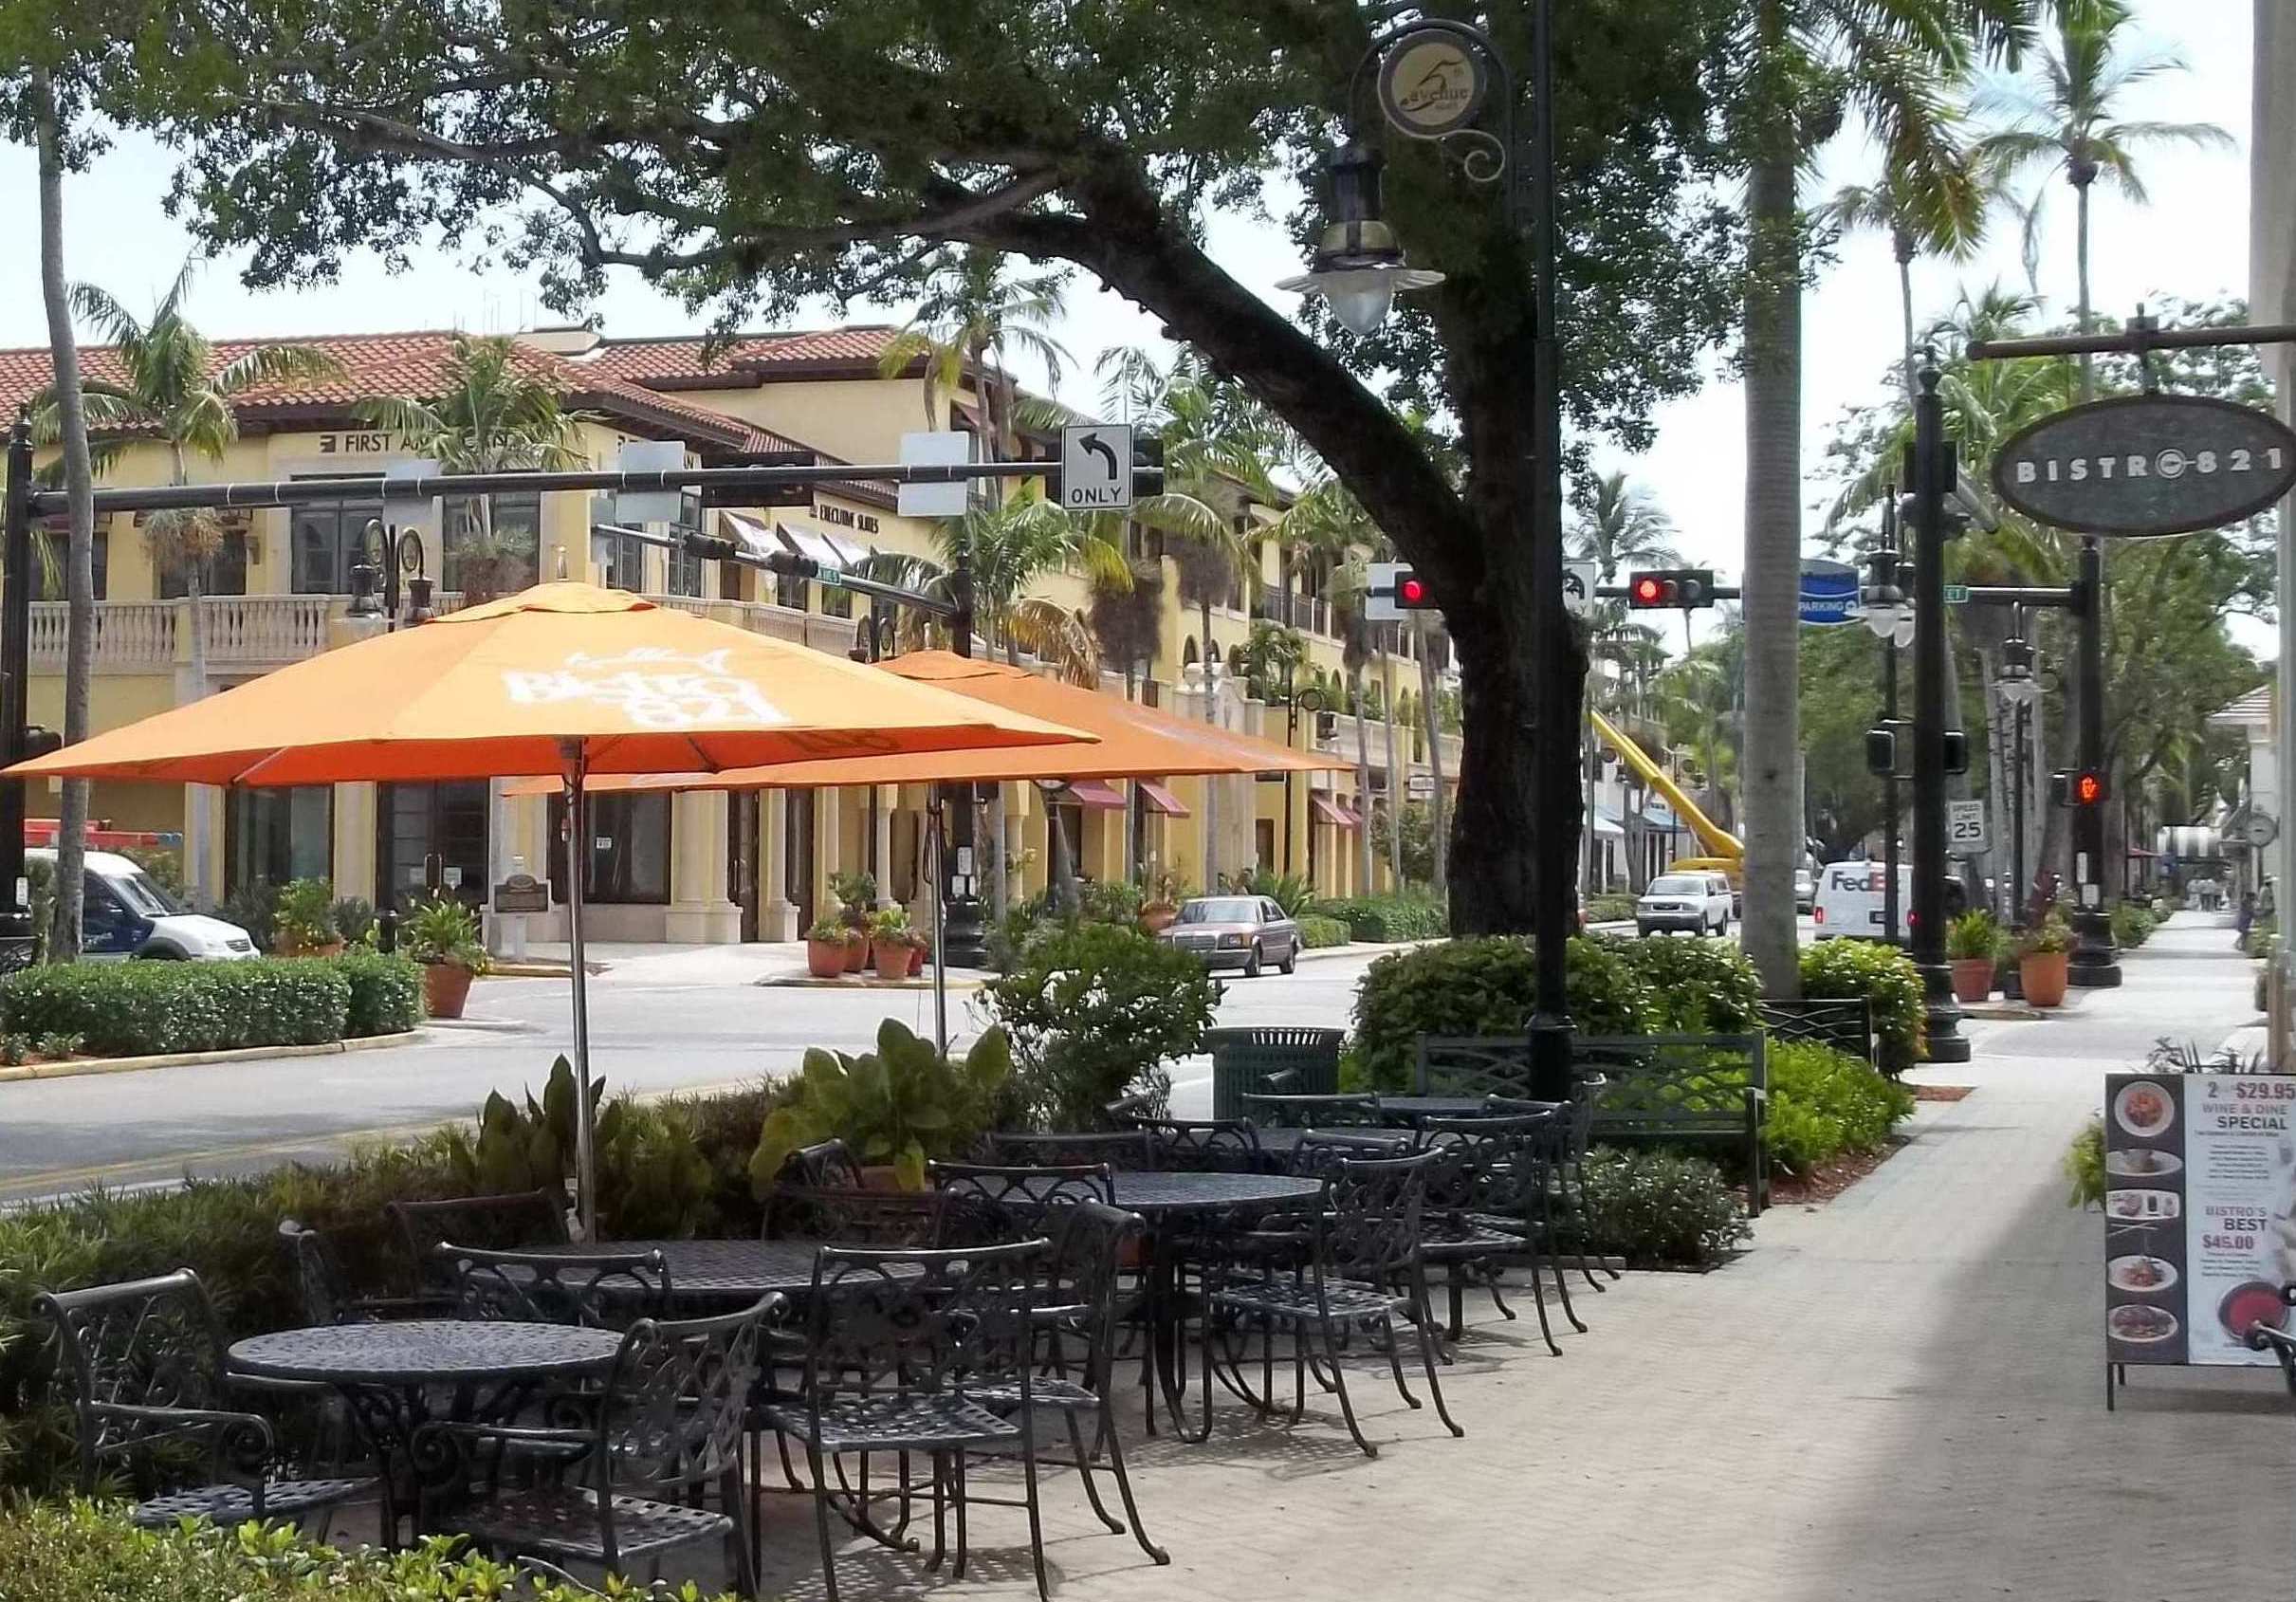 Fifth Avenue South: Prime Dining, Shopping and Entertainment in Naples